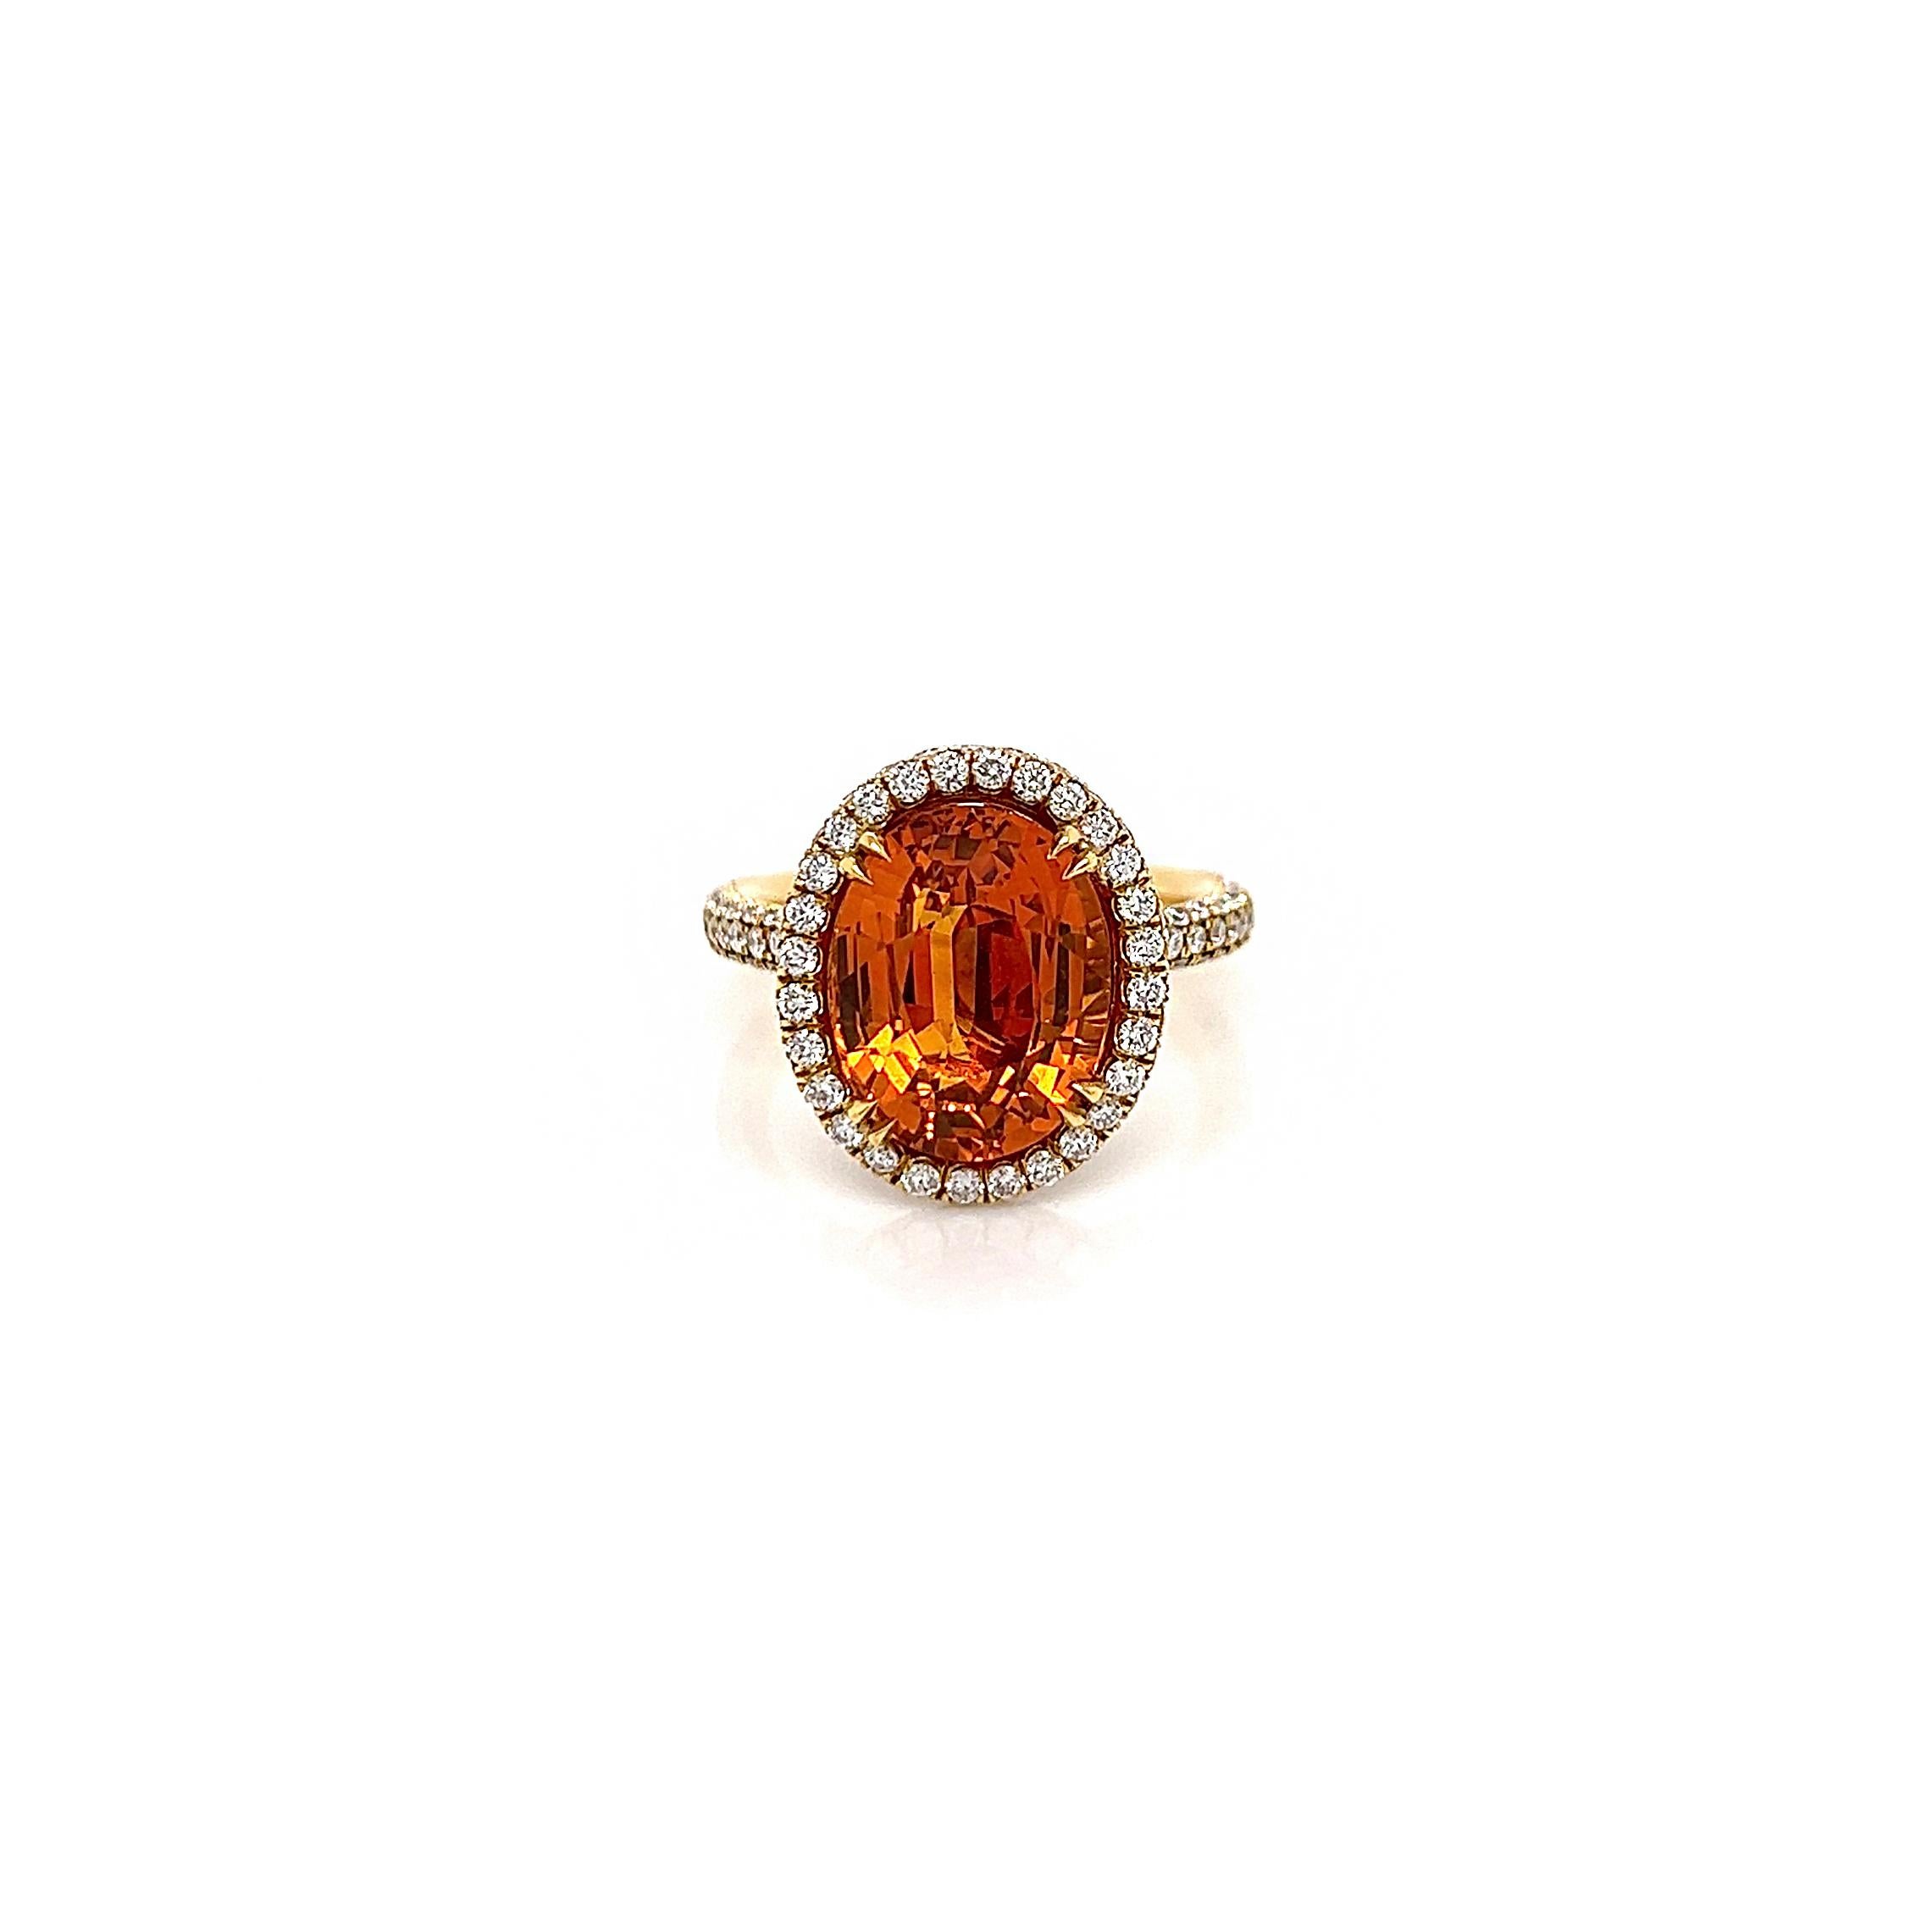 This phenomenal ladies' ring boasts an impressive total carat weight of 9.28 carats and showcases a breathtaking orange sapphire encircled by a halo of dazzling diamonds. It has been meticulously certified by GIA to provide complete quality